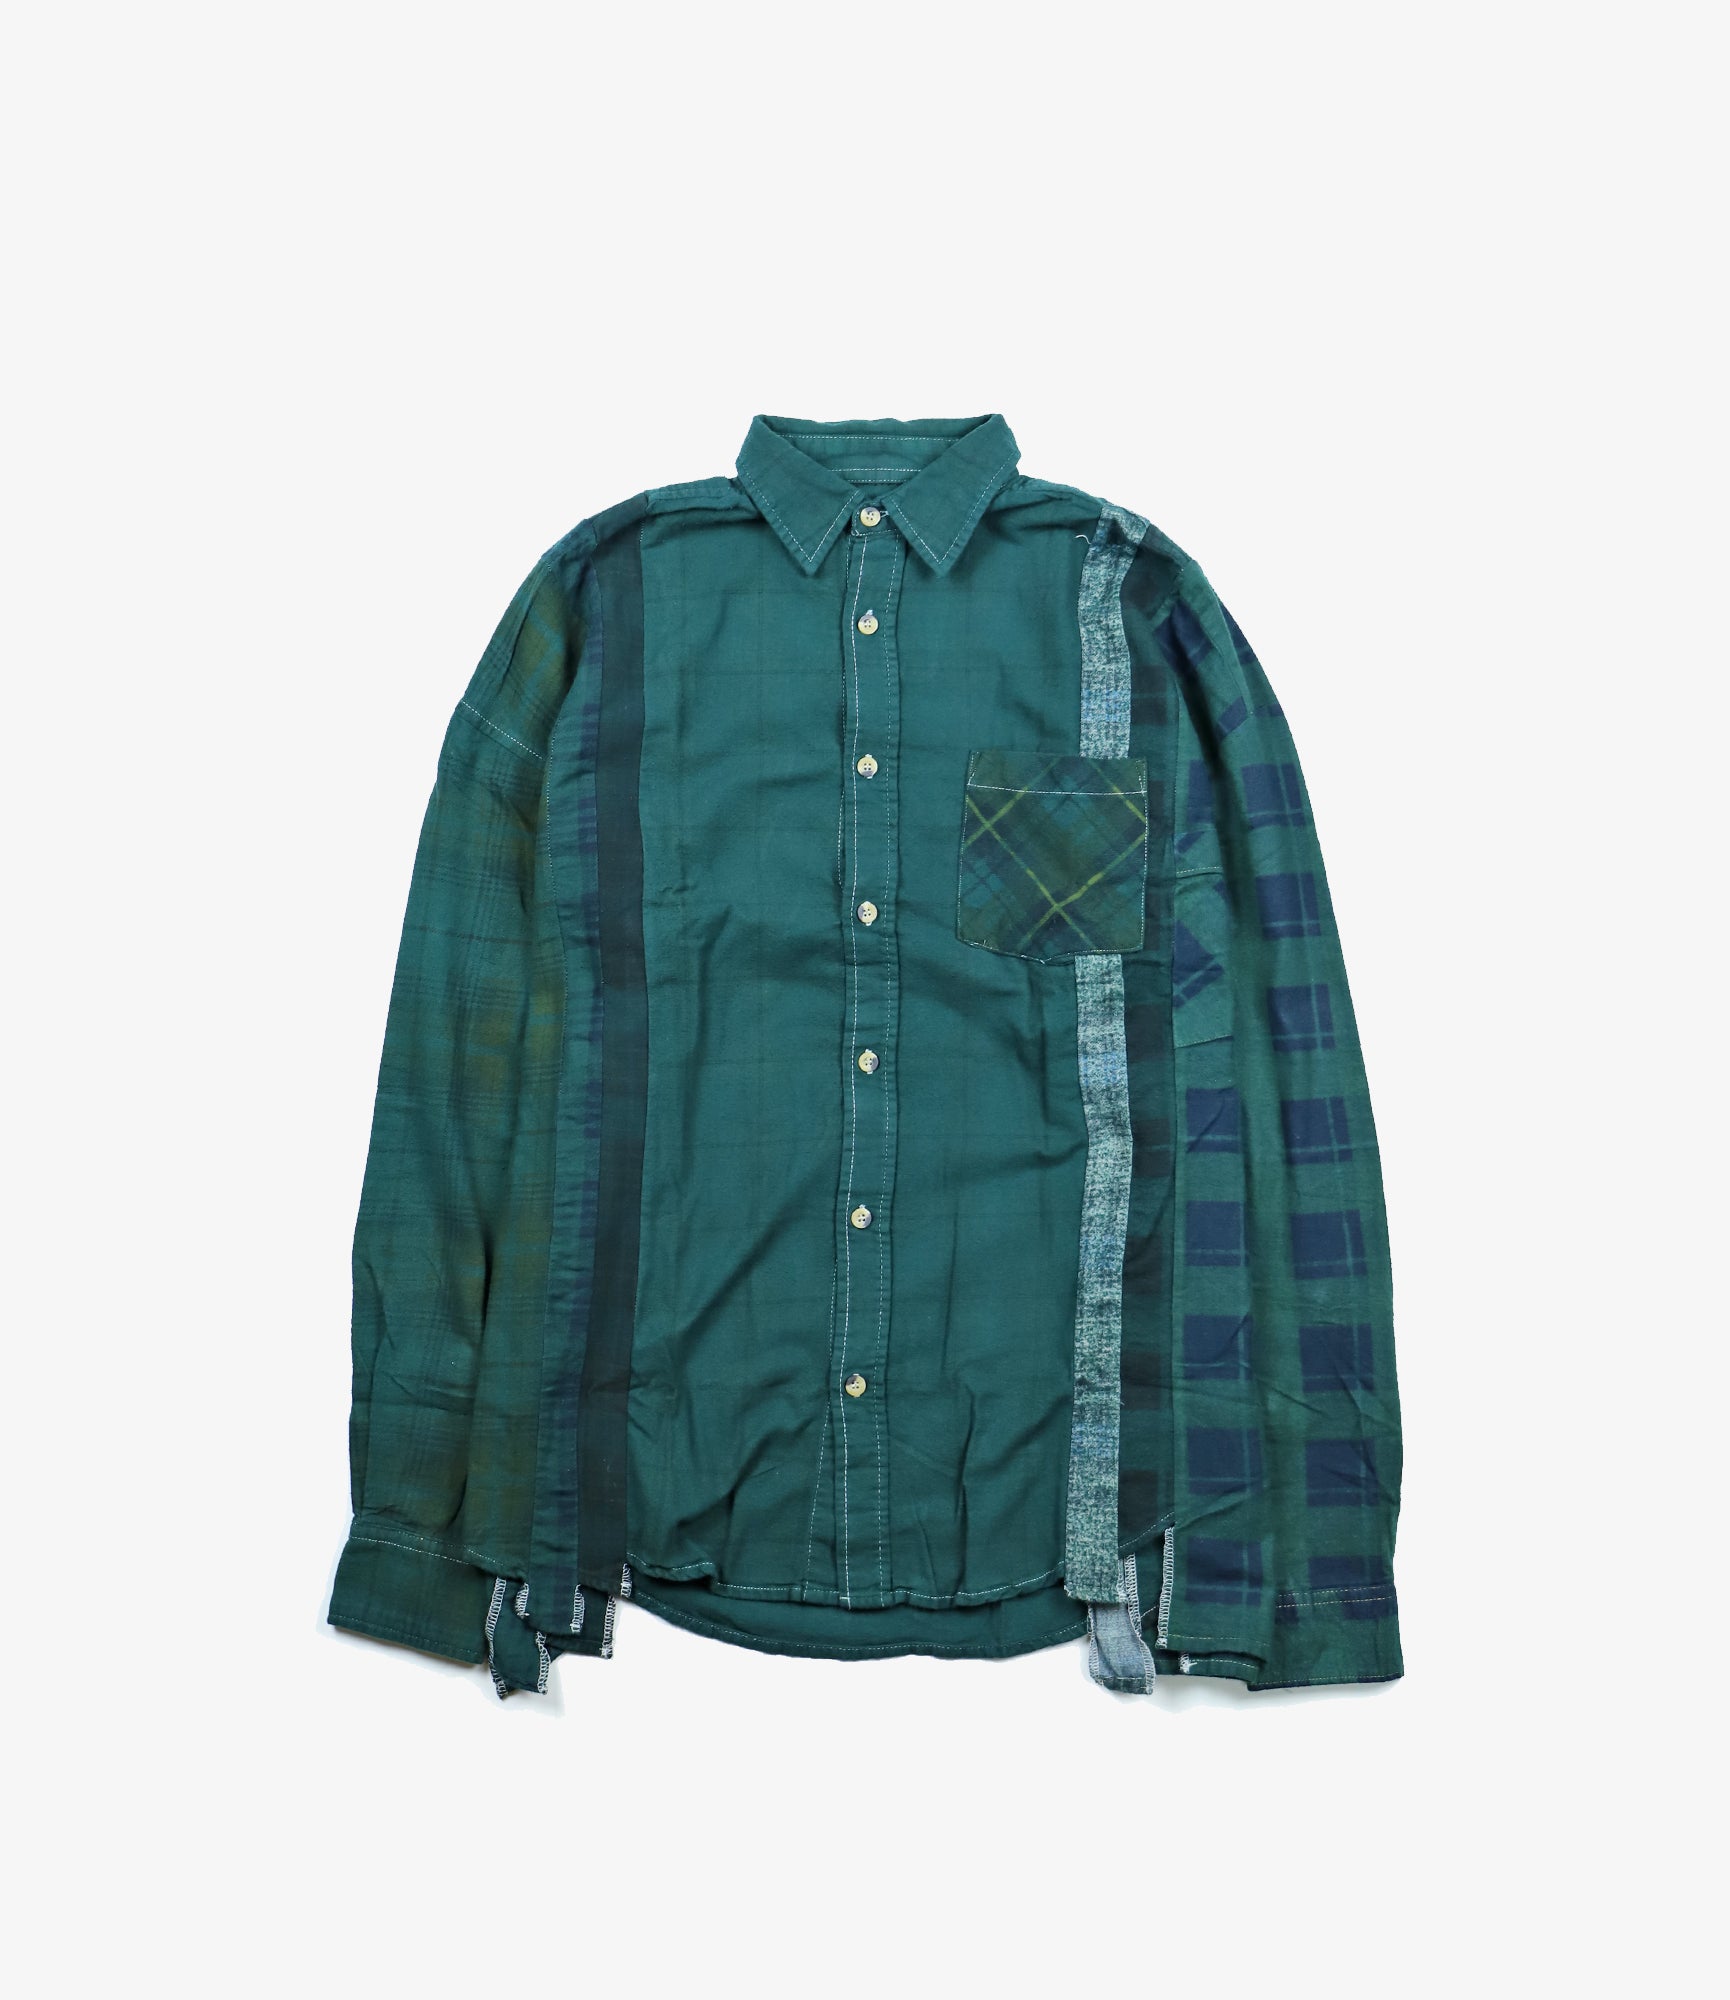 Rebuild by Needles Flannel Shirt - 7 Cuts Wide / Over Dye - Green